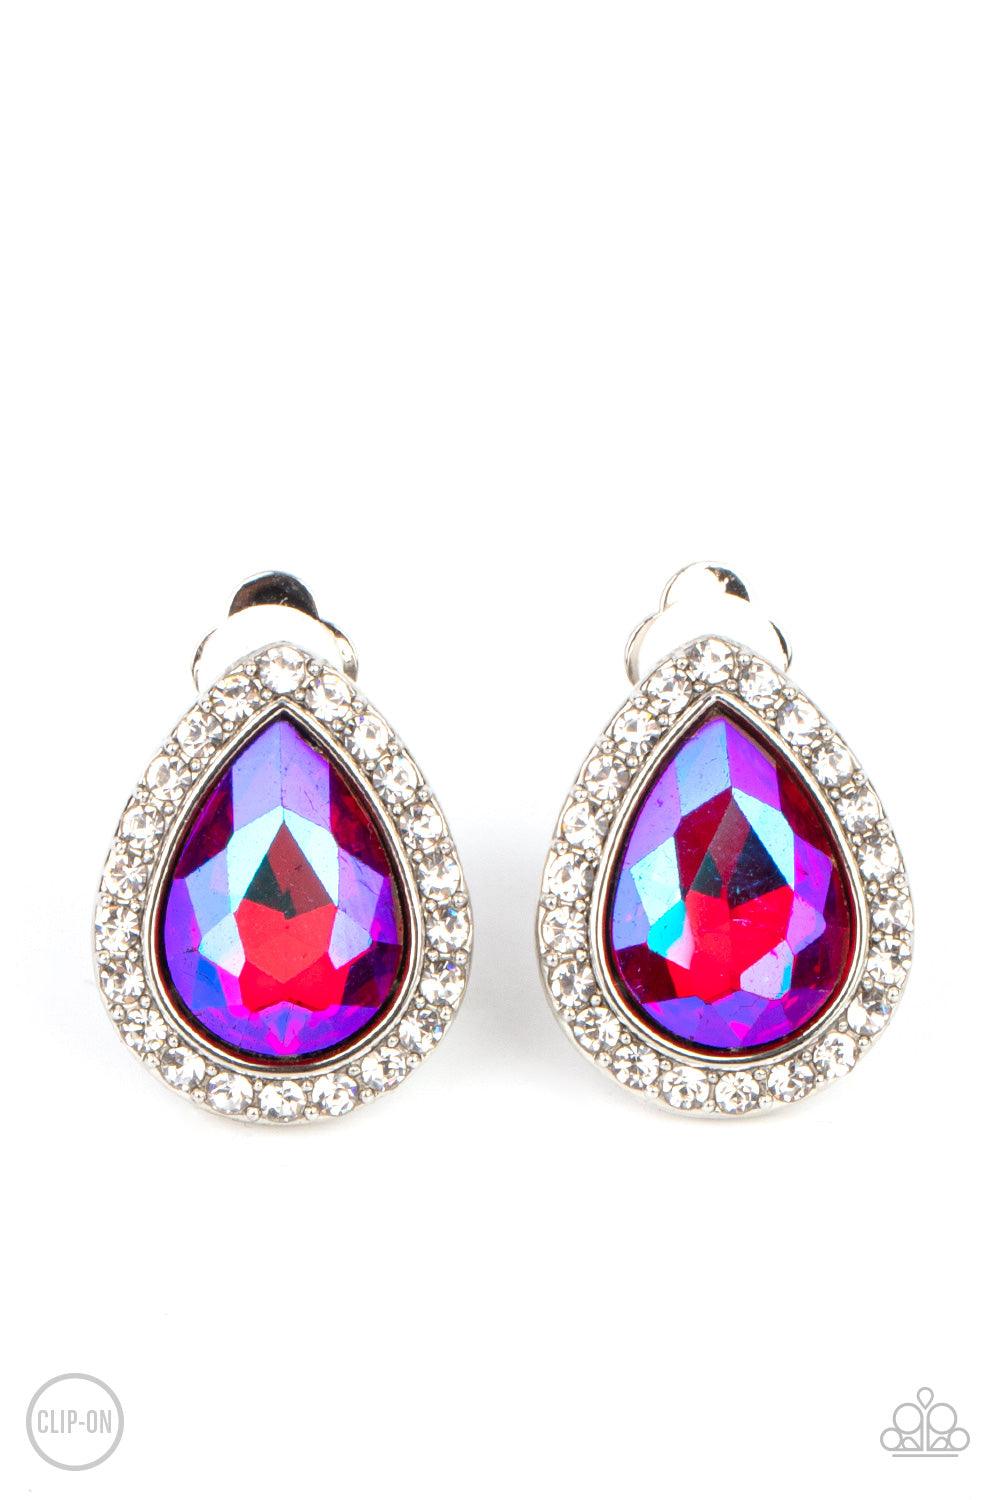 Paparazzi Accessories Cosmic Castles - Pink *Clip-On Featuring a flashy UV finish, a faceted pink teardrop gem is pressed into a silver frame bordered with glittery white rhinestones for a glamorous finish. Earring attaches to a standard clip-on fitting.